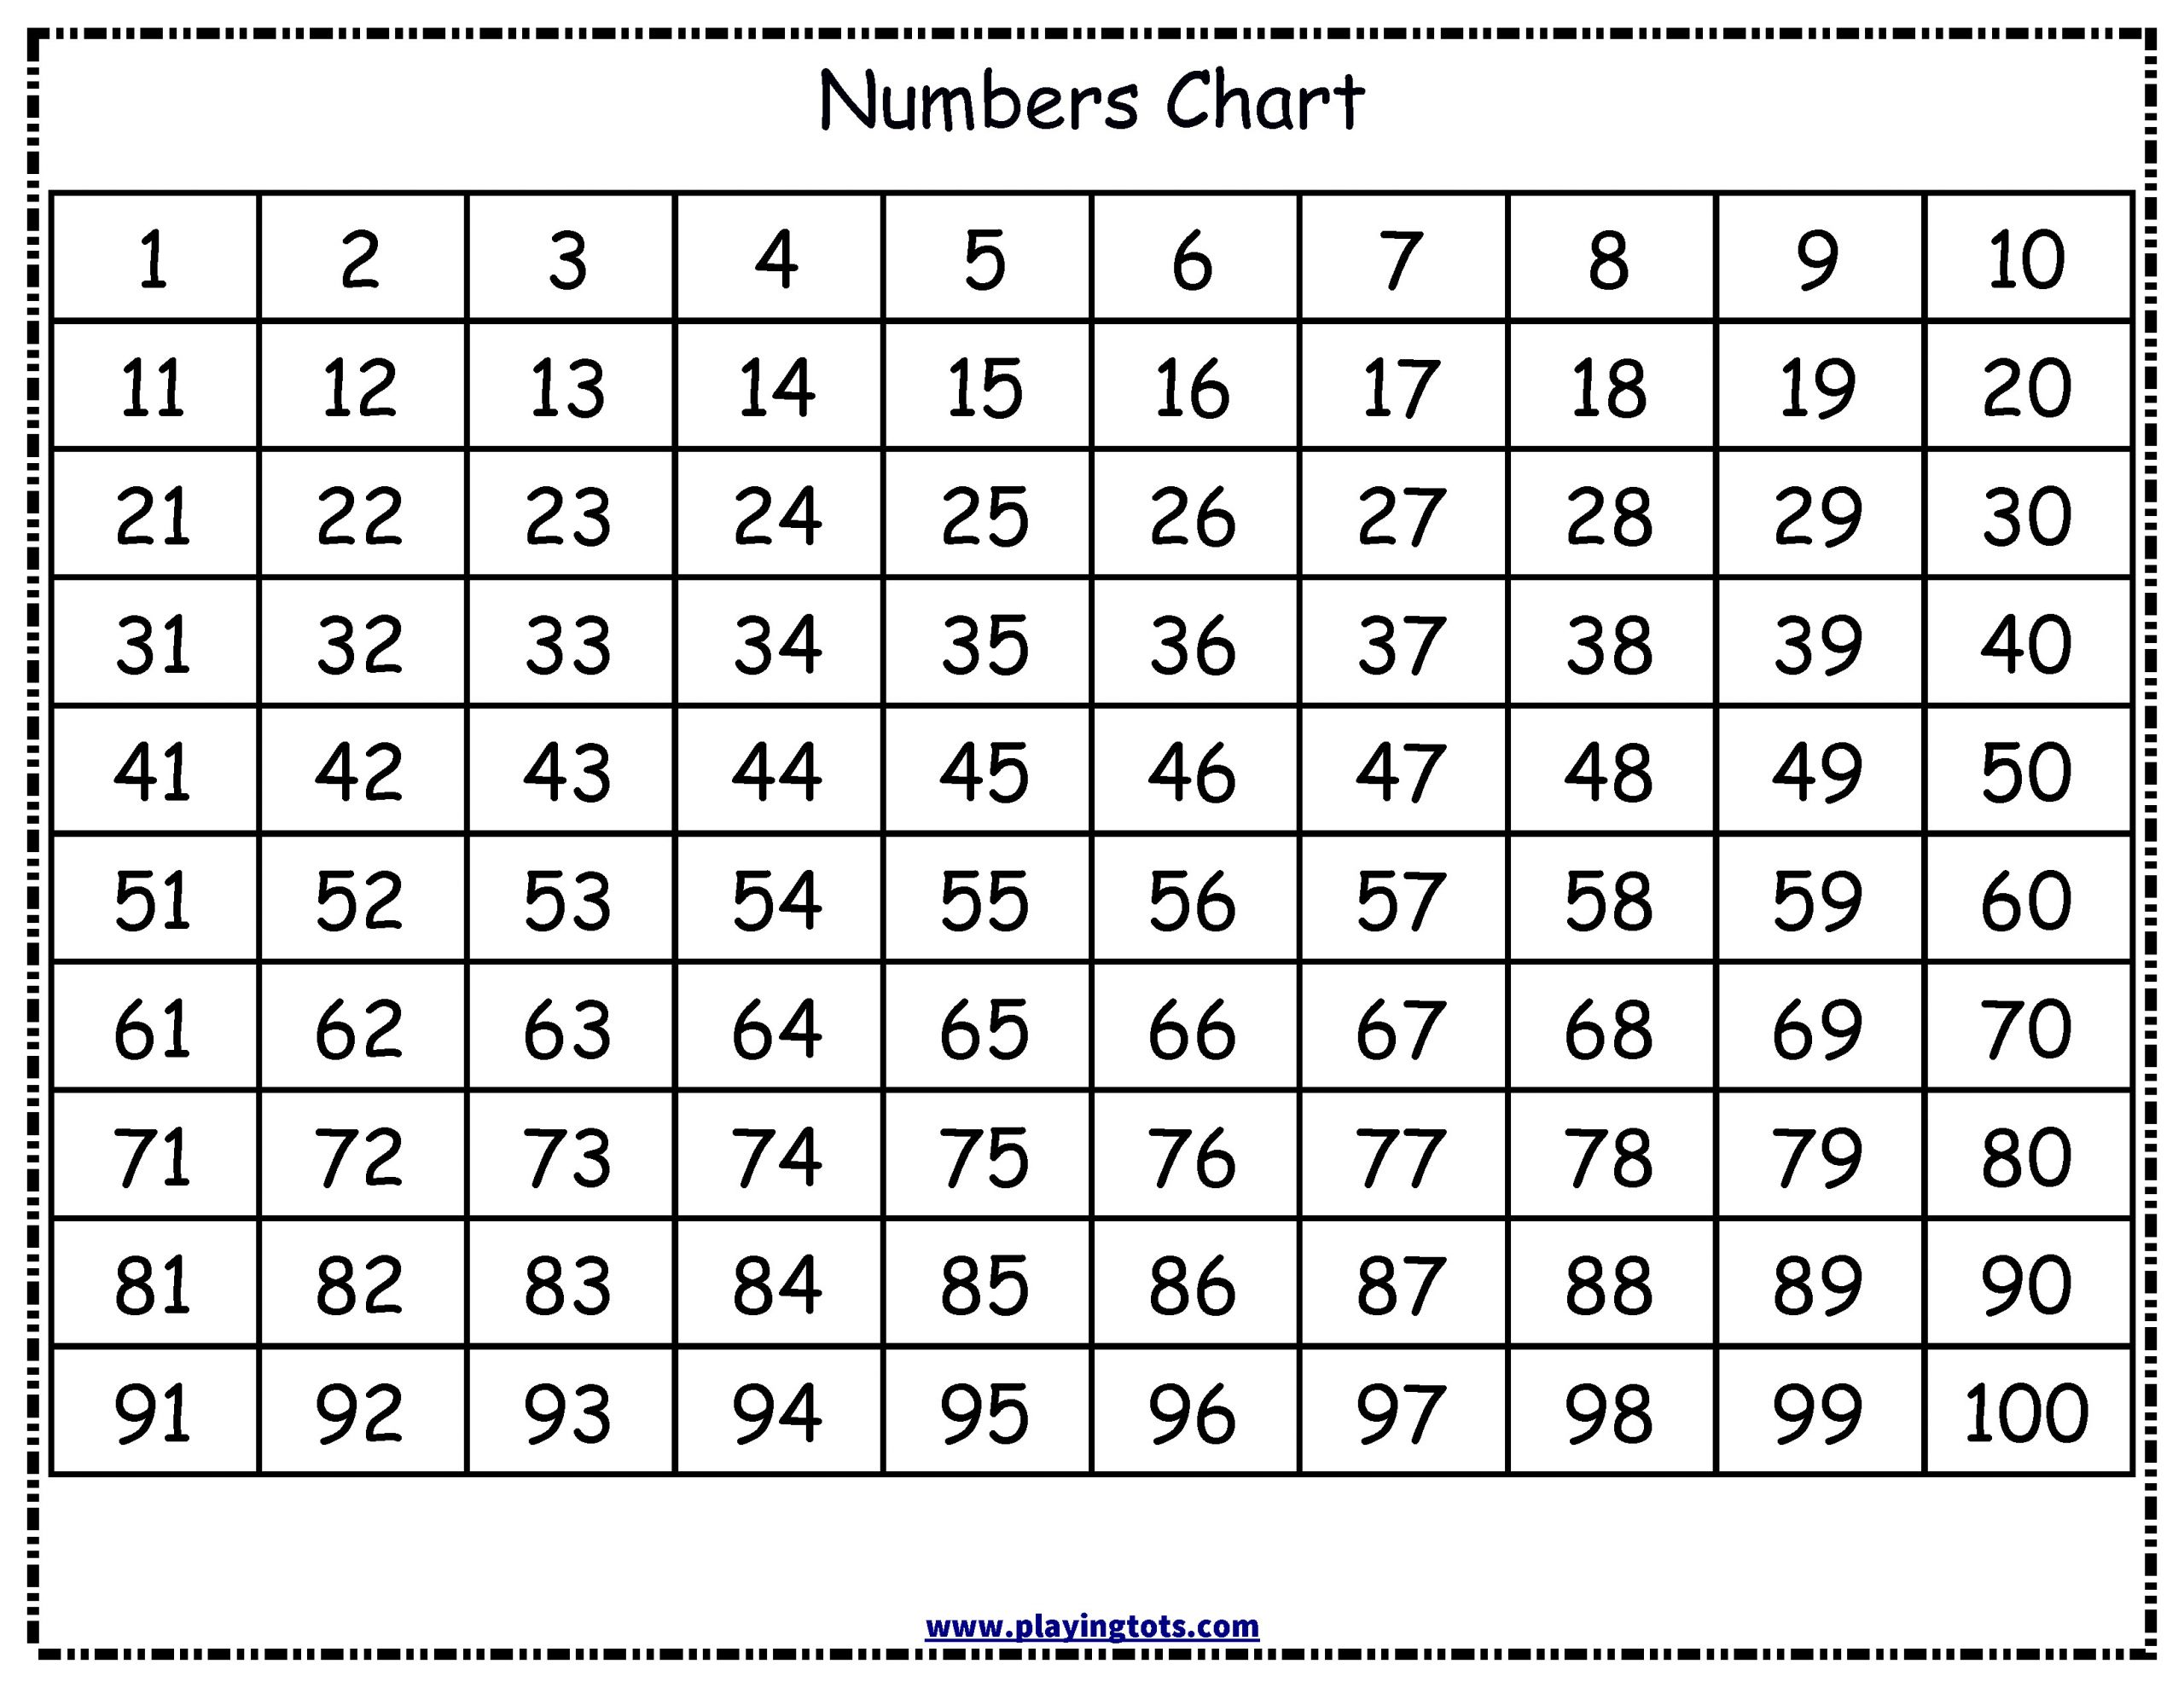 Free Math Worksheets Second Grade 2 Skip Counting Skip Counting by 4